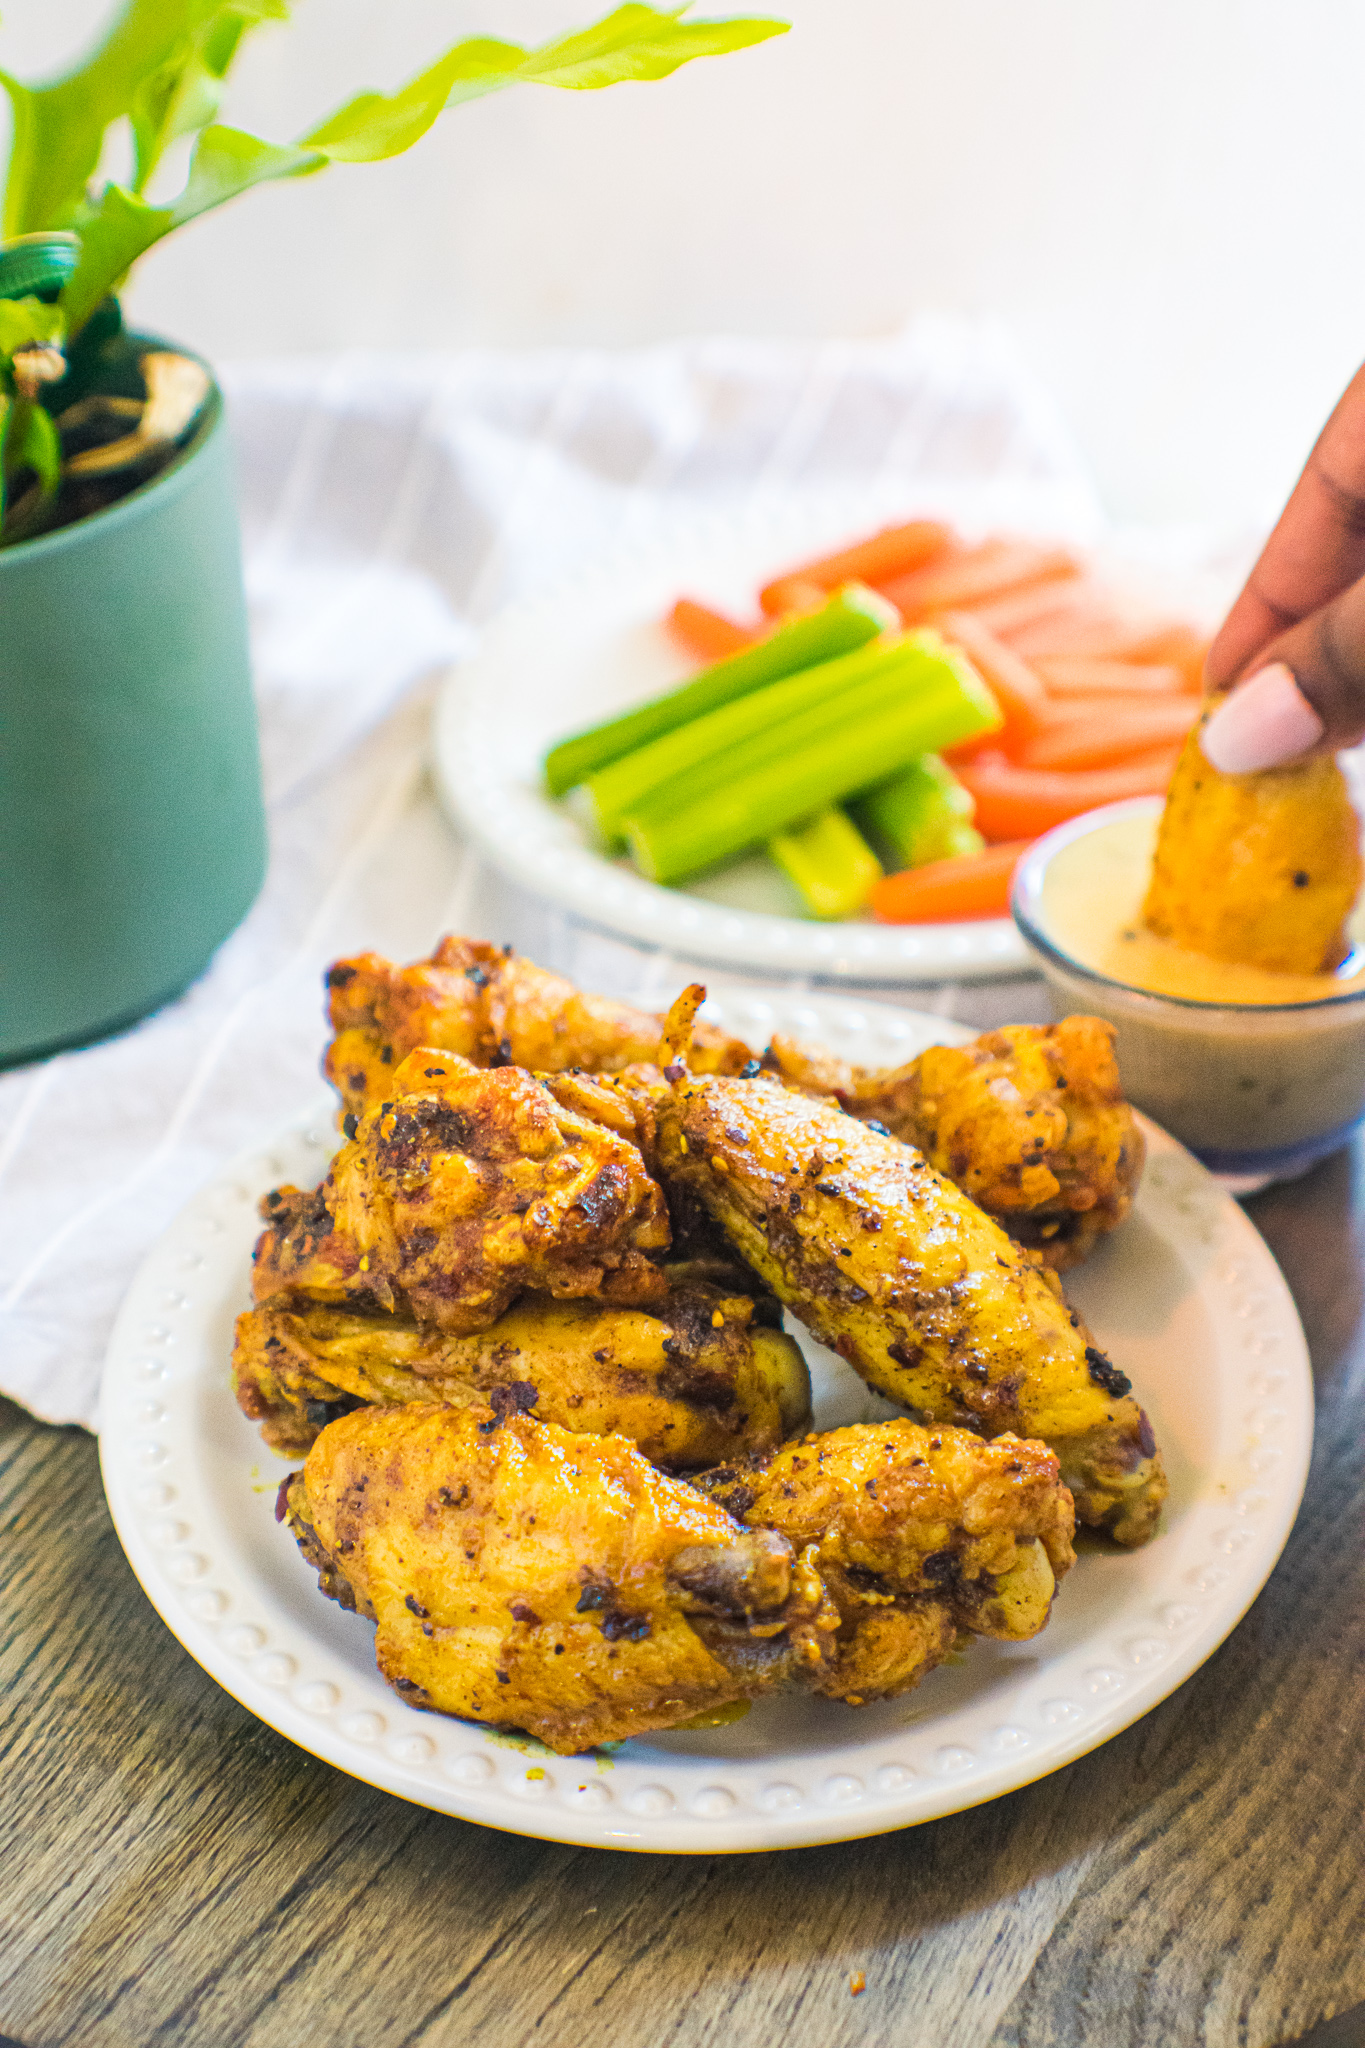 Moroccan Spice Wings - Air Fried | Keto, Low-Carb, Whole30 